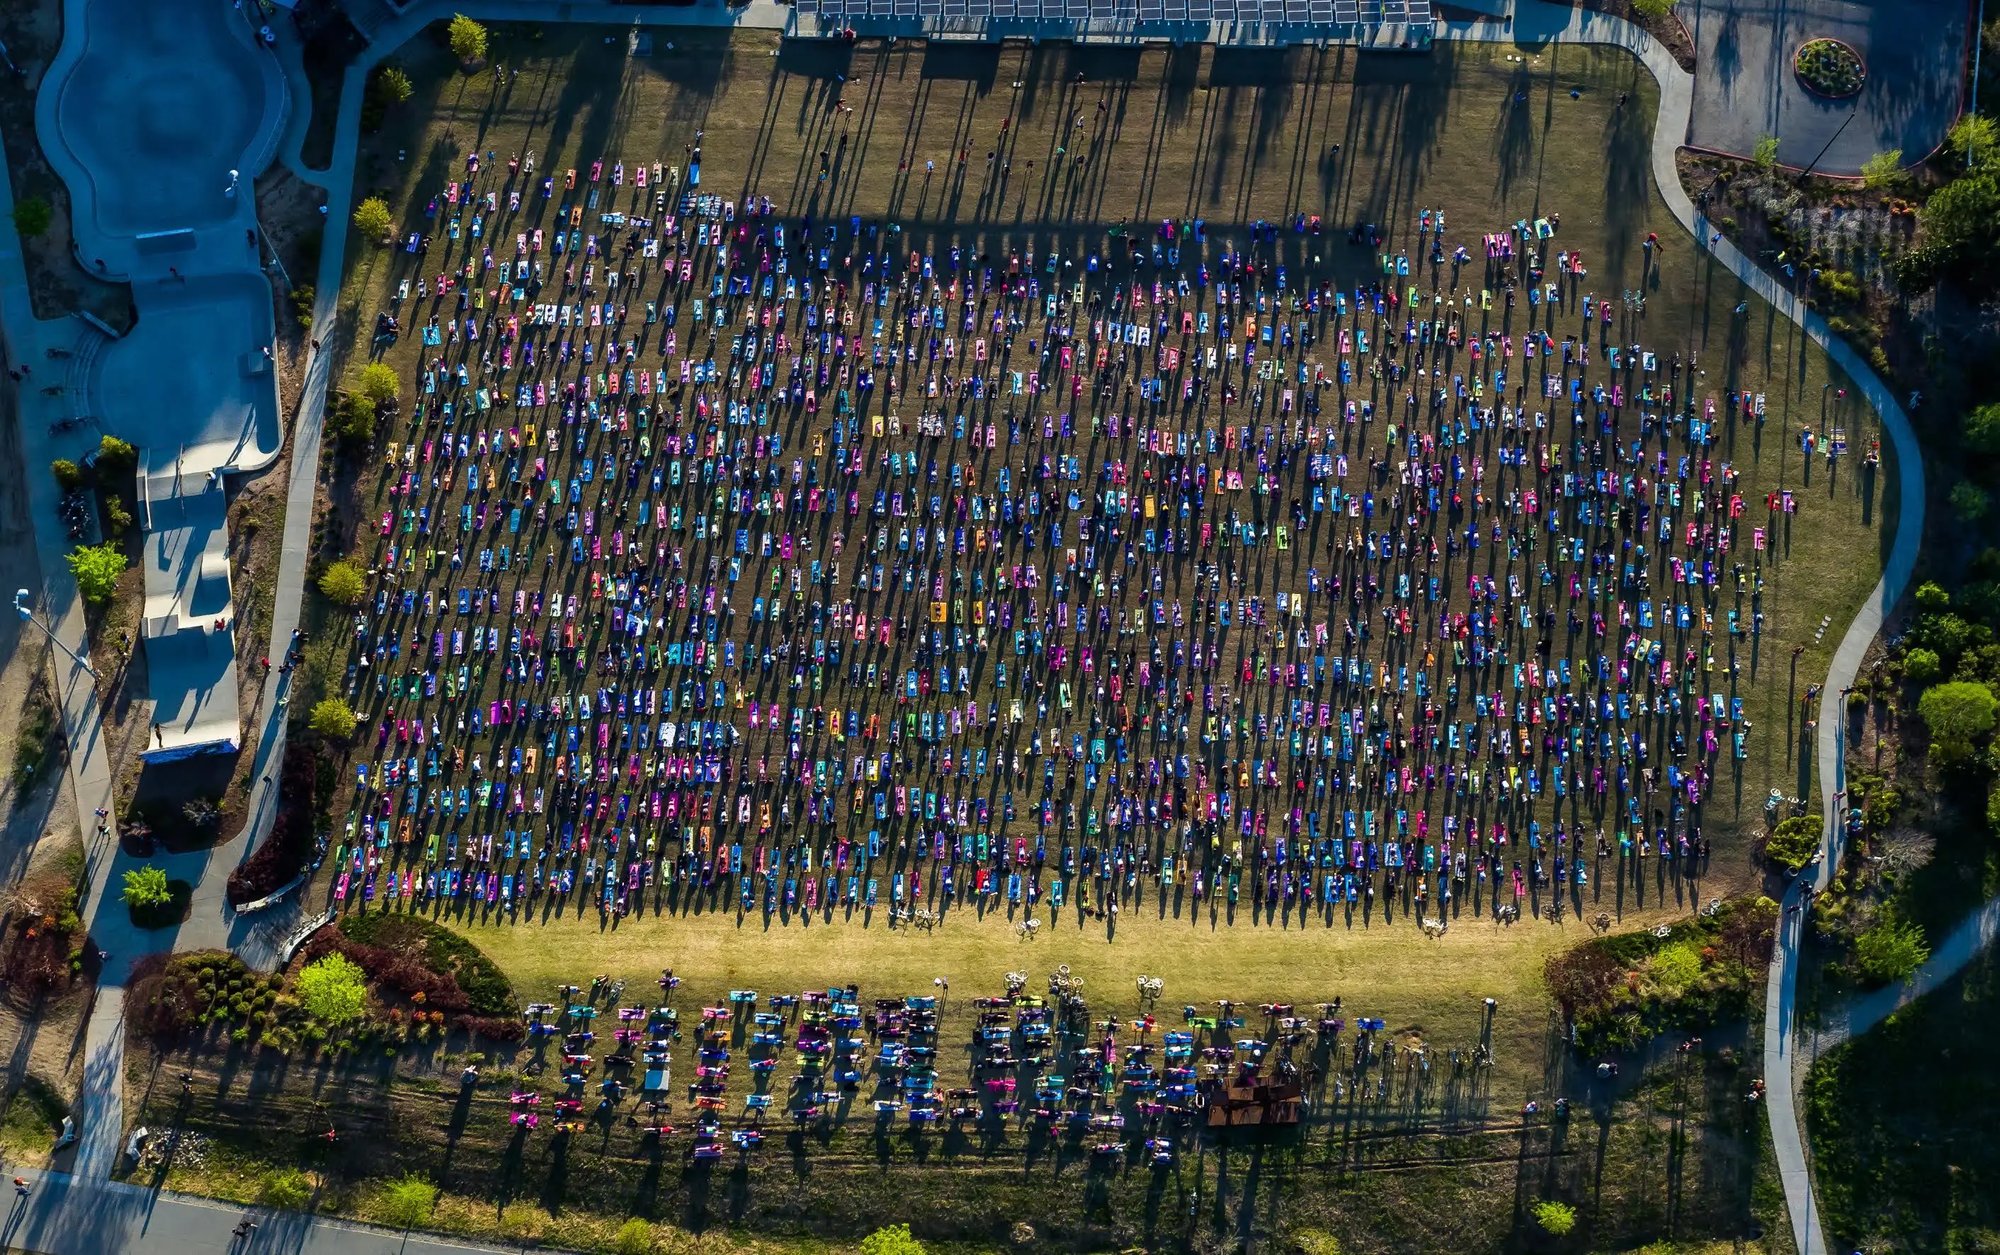 Overhead shot of a park filled with many people doing yoga